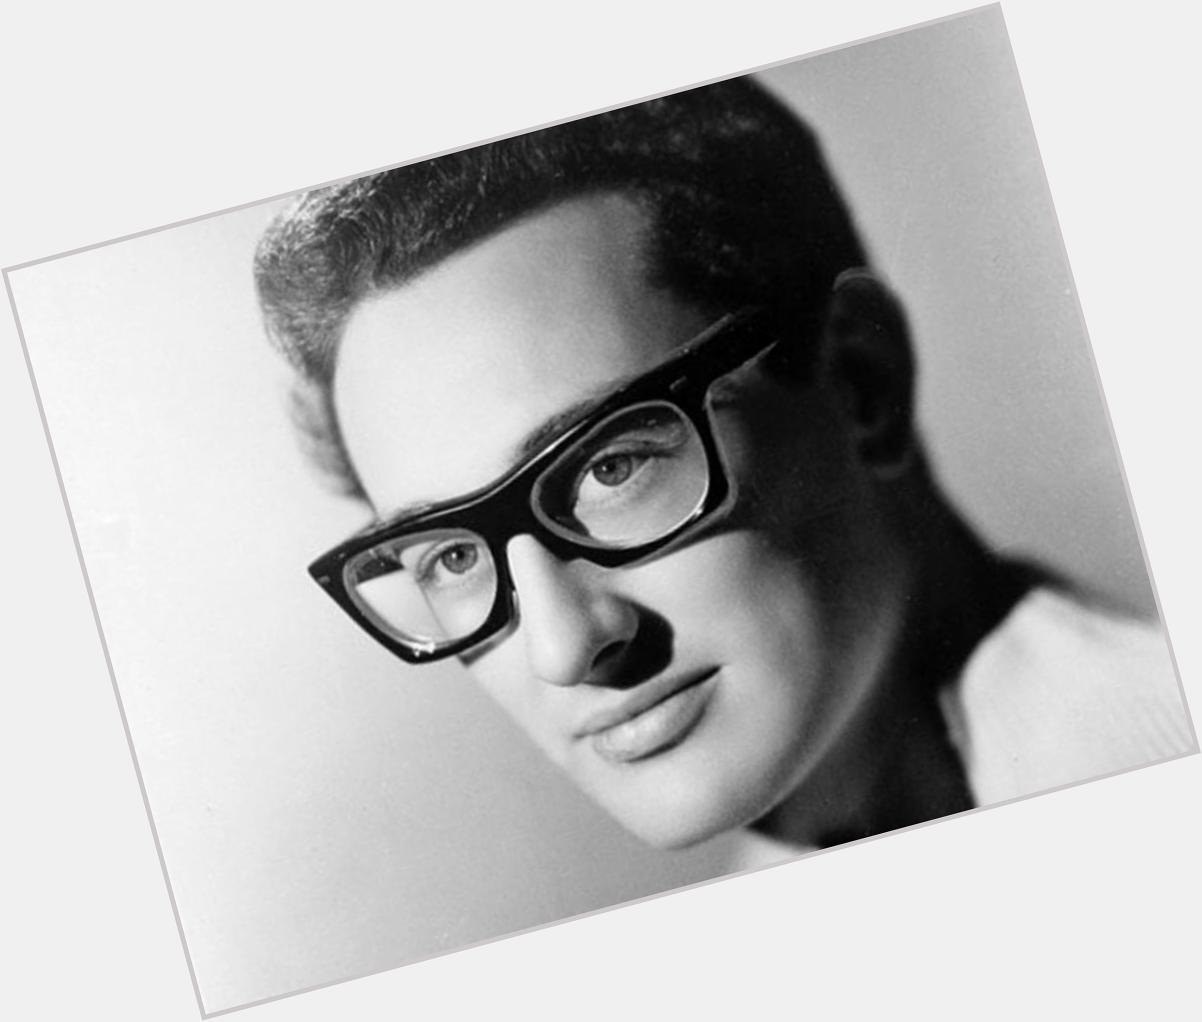 Happy Birthday to the one and only Buddy Holly! You\re music is beyond amazing 